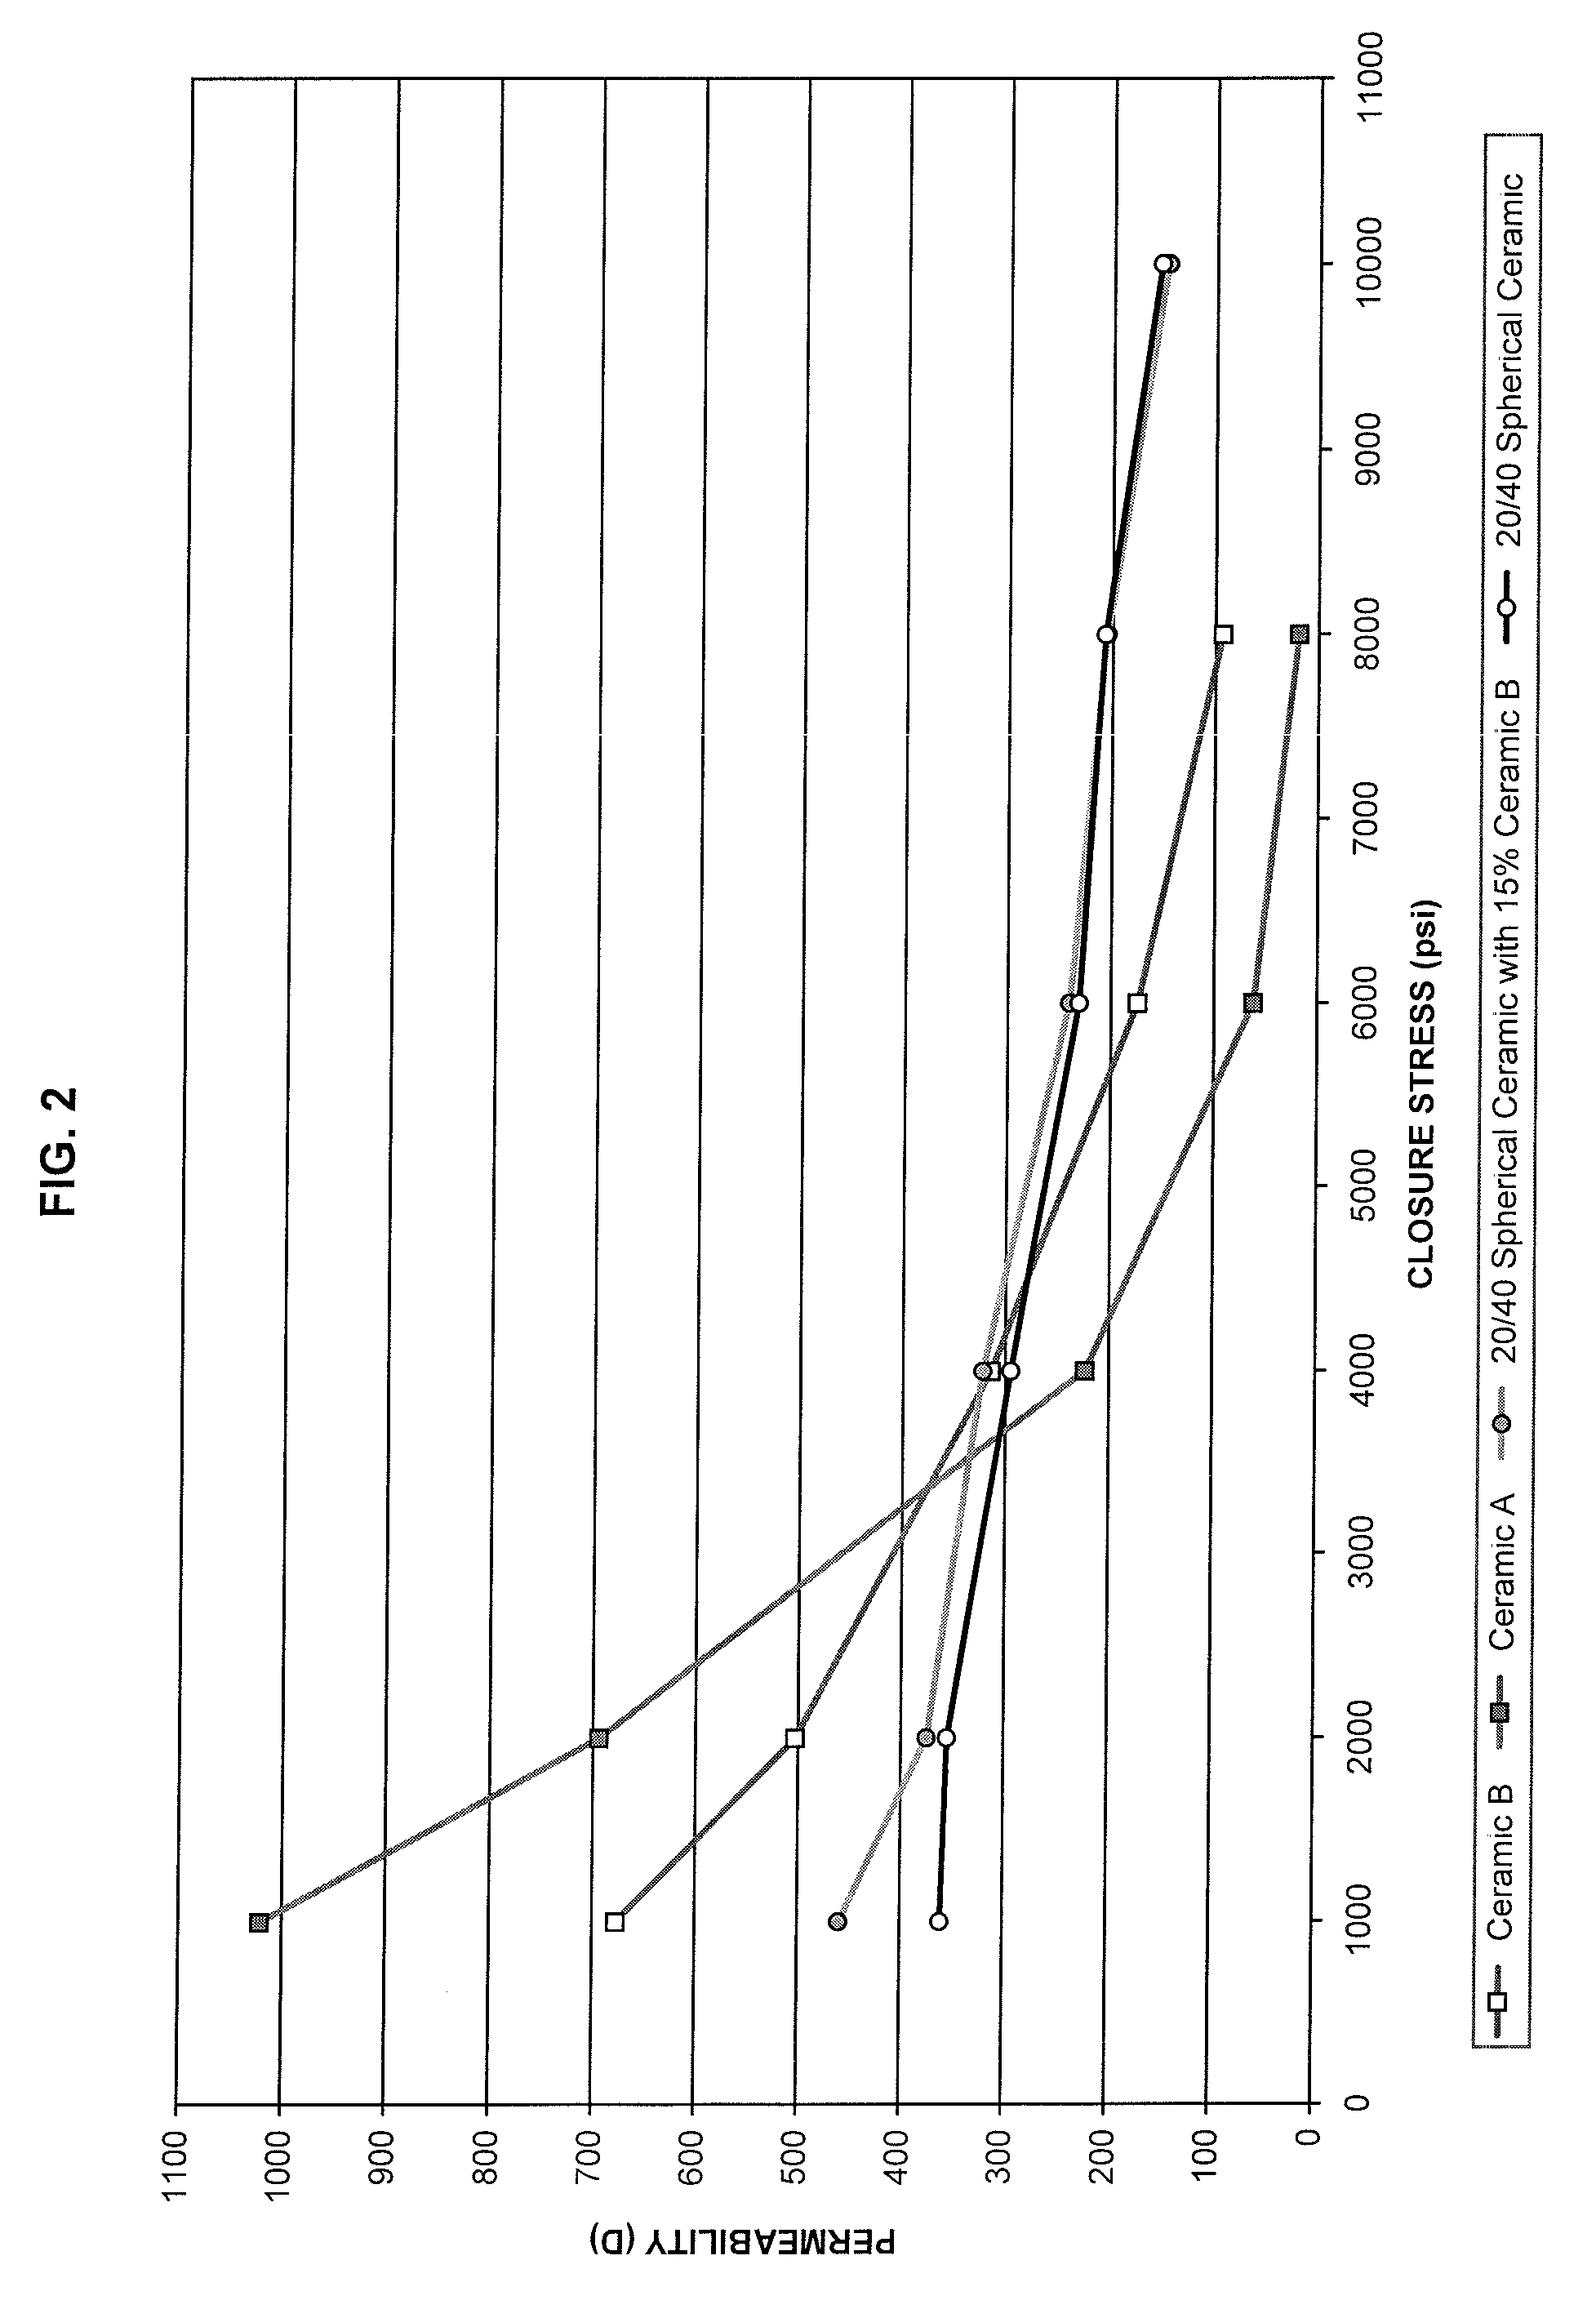 Non-spherical well treating particulates and methods of using the same